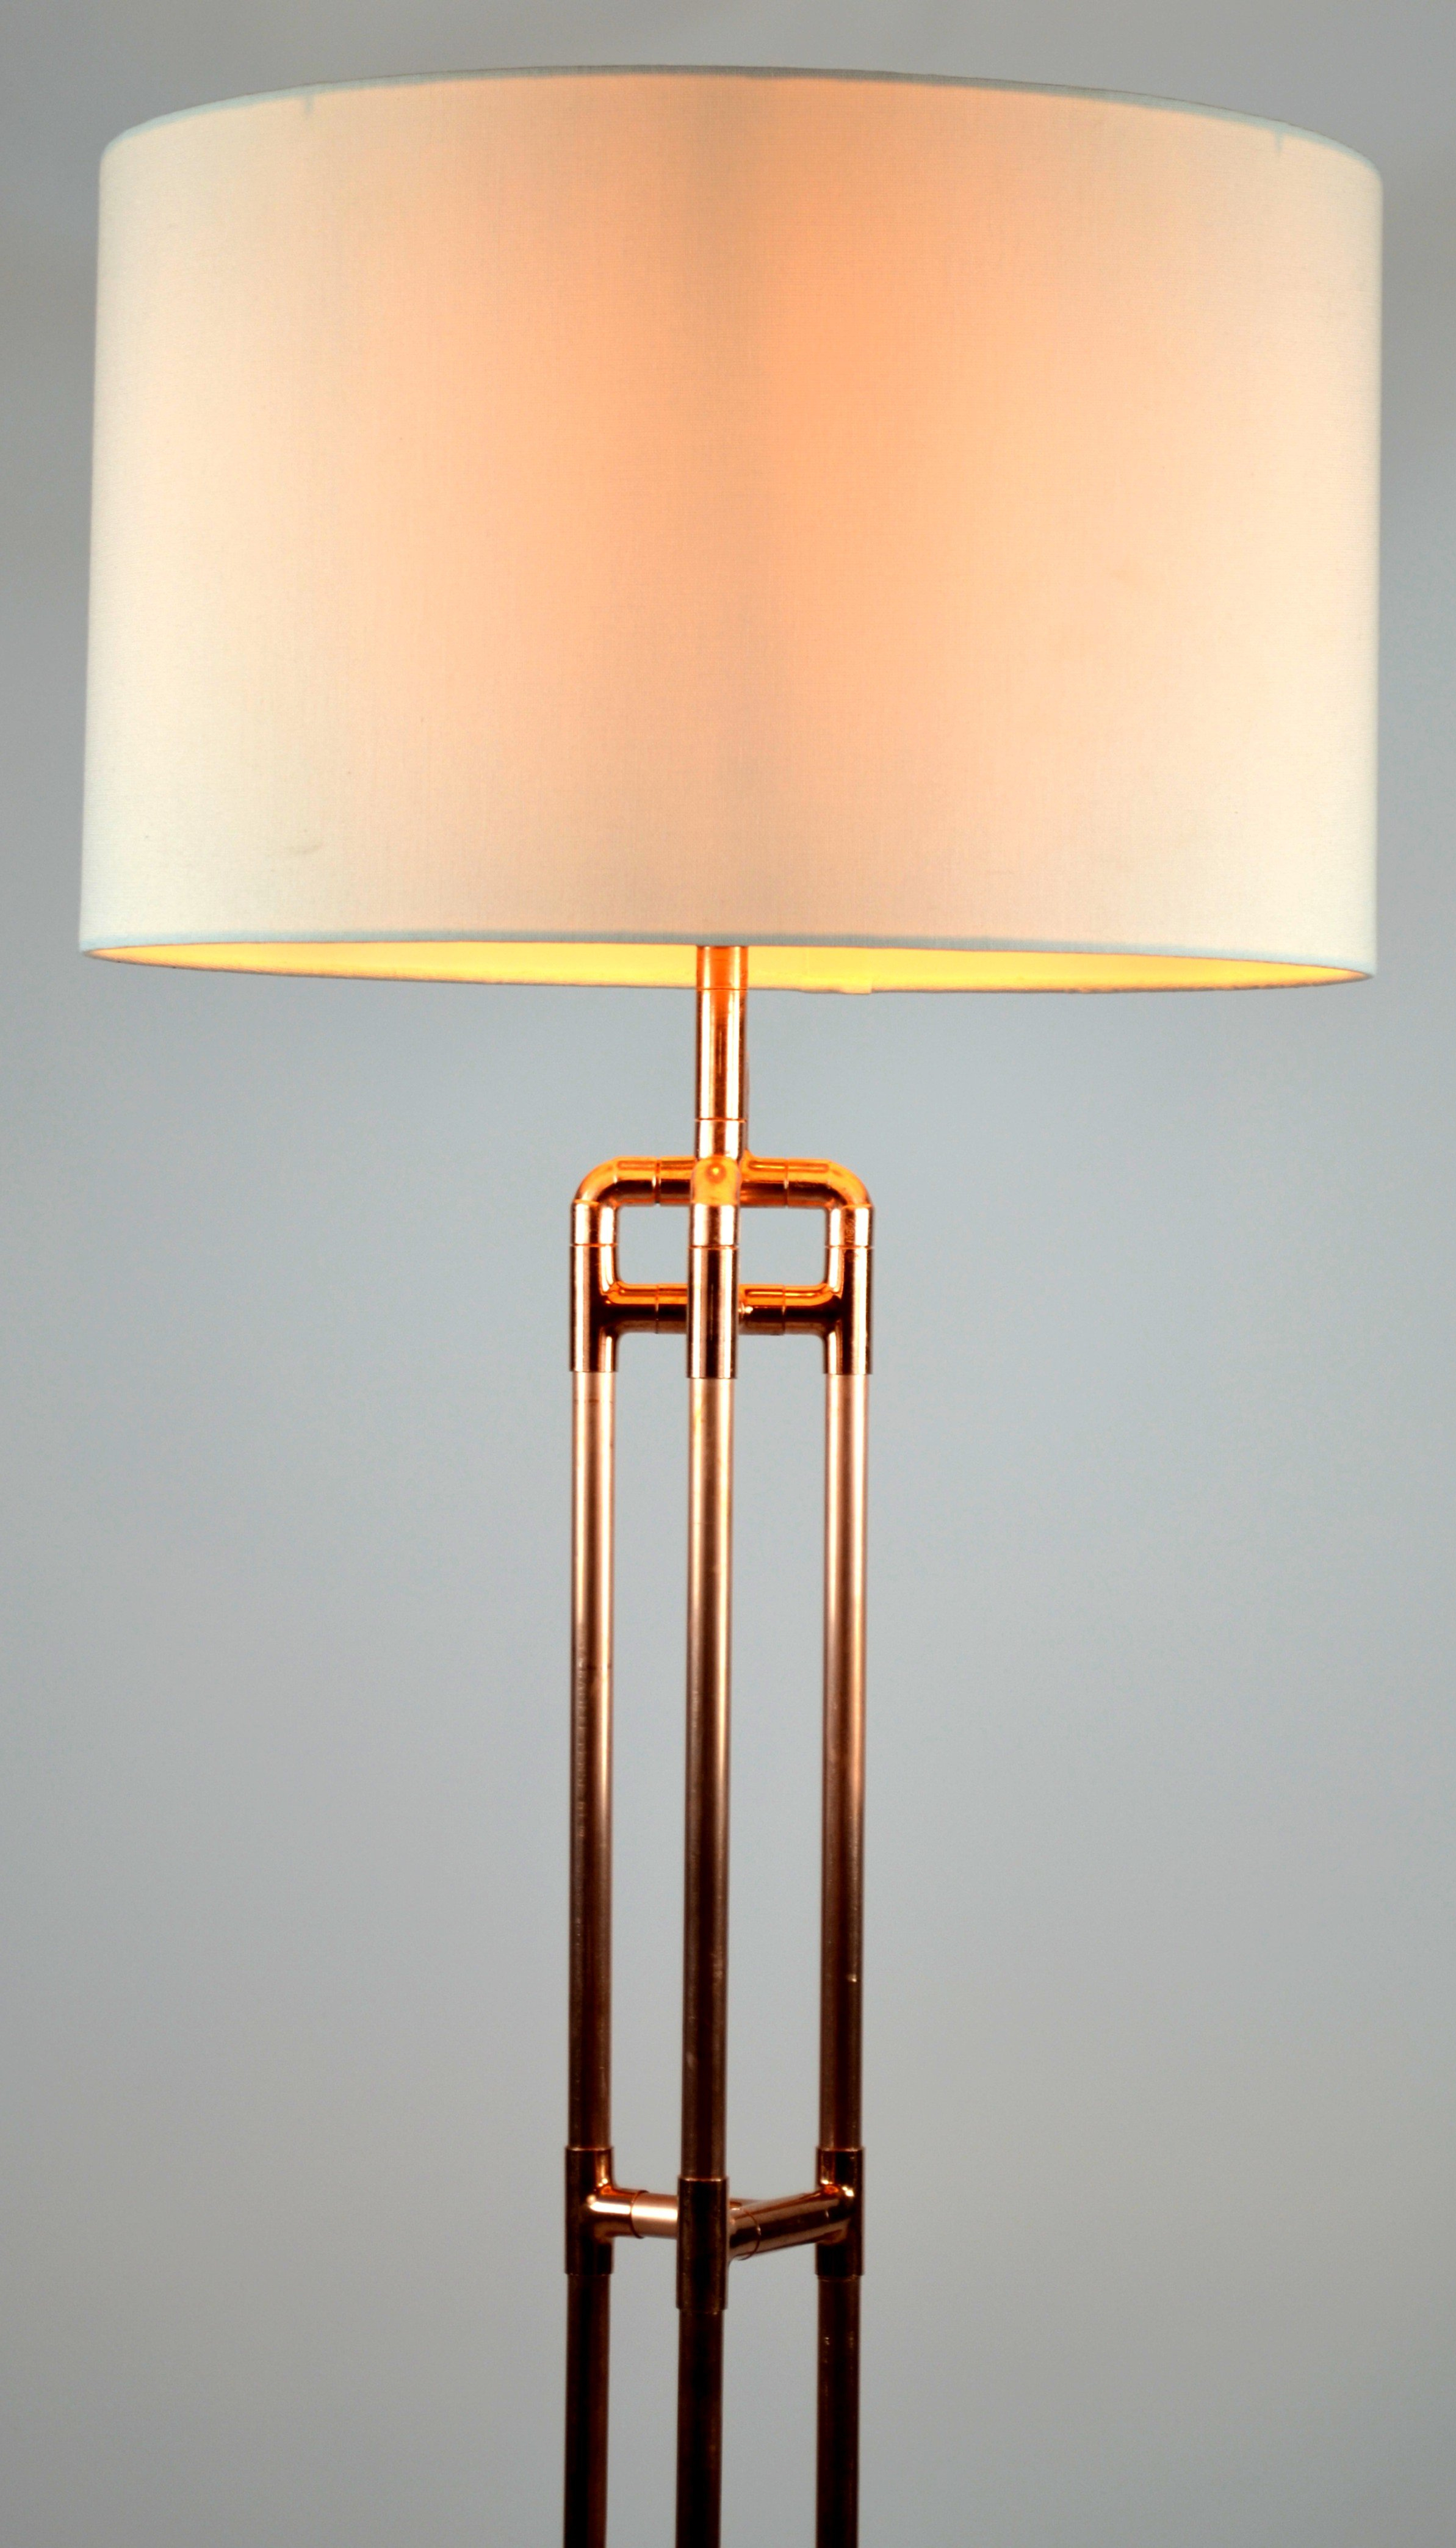 Tri Tower Copper Floor Lamp Base throughout size 2386 X 4175